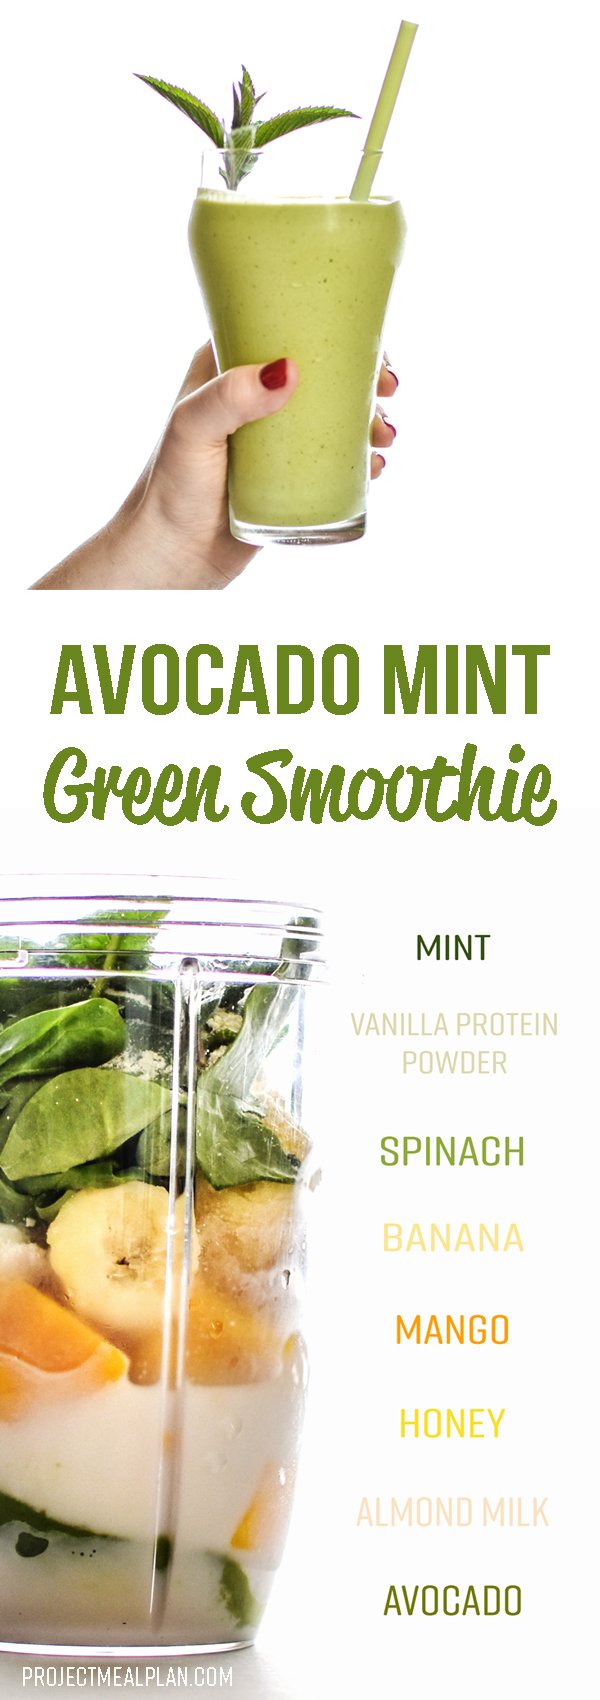 Creamy Avocado Mint Green Smoothie Recipe - Project Meal Plan